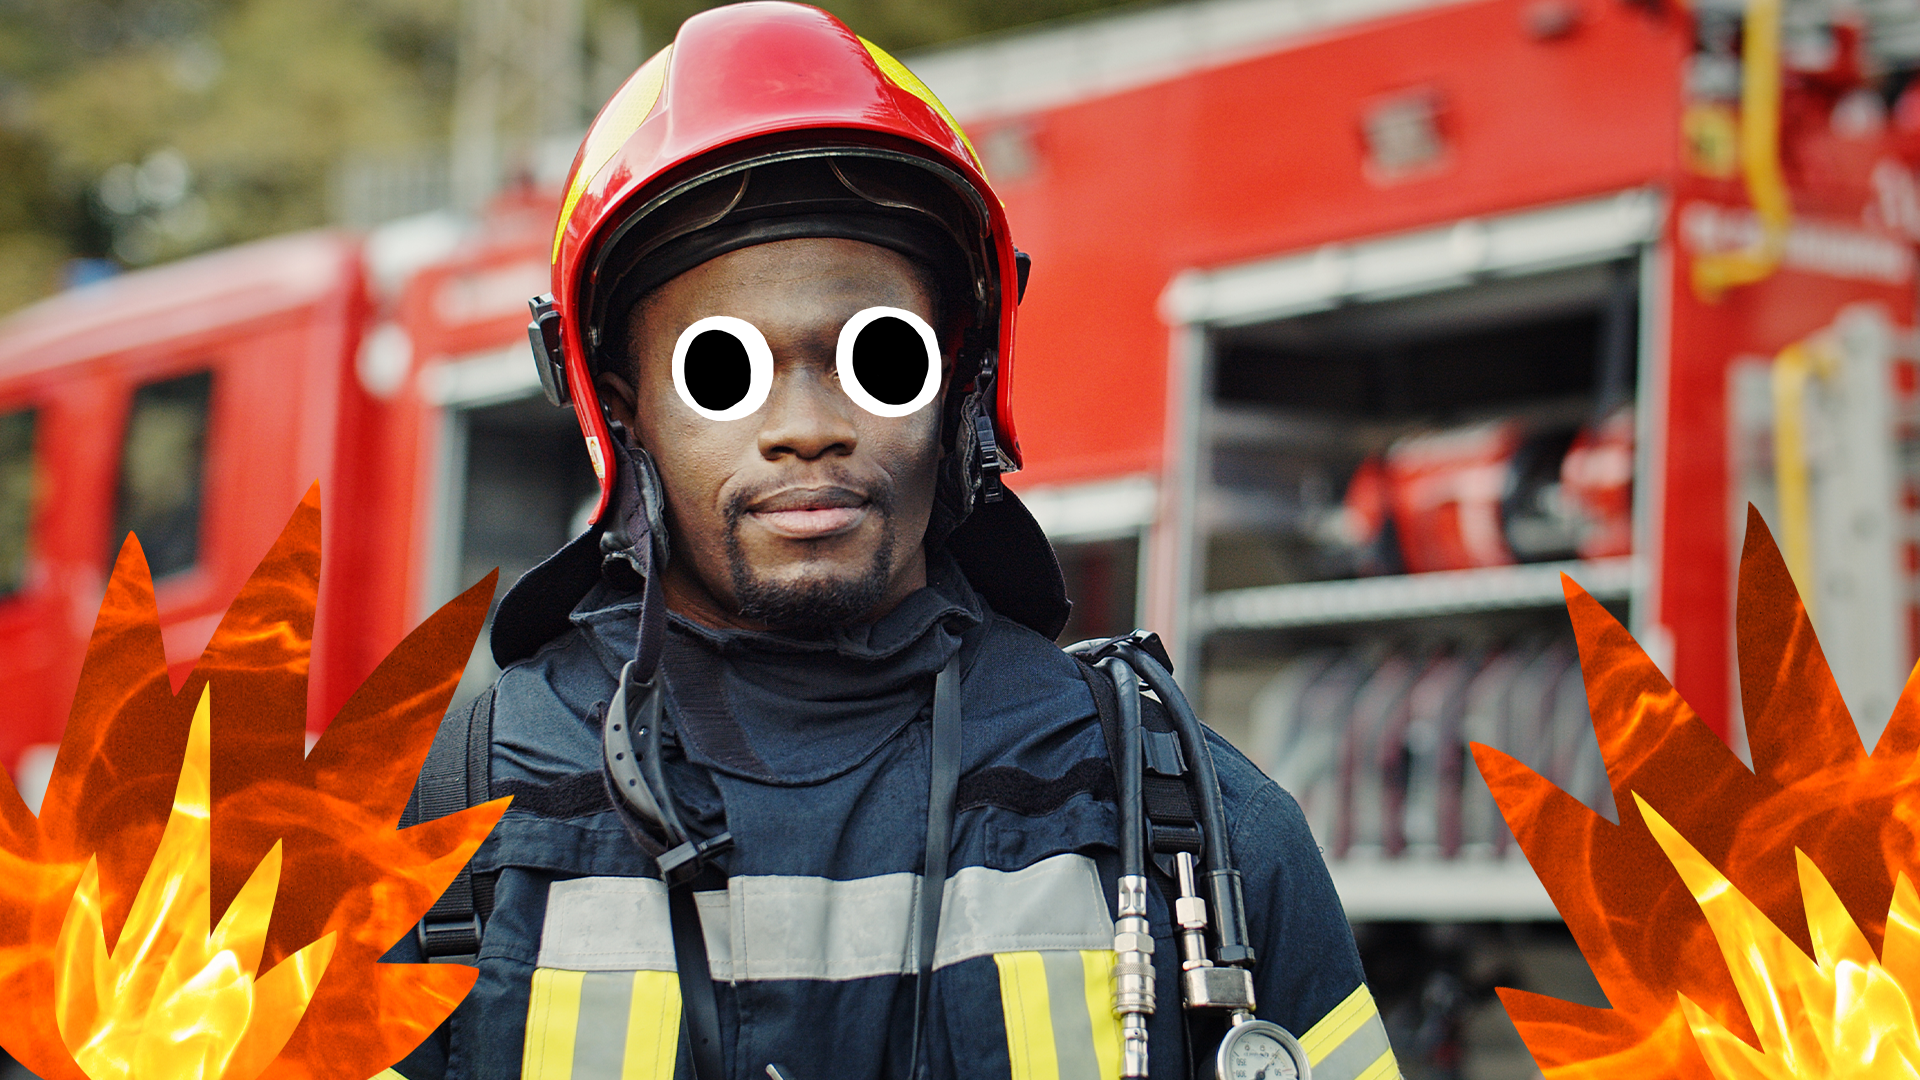 A fireman with Beano flames